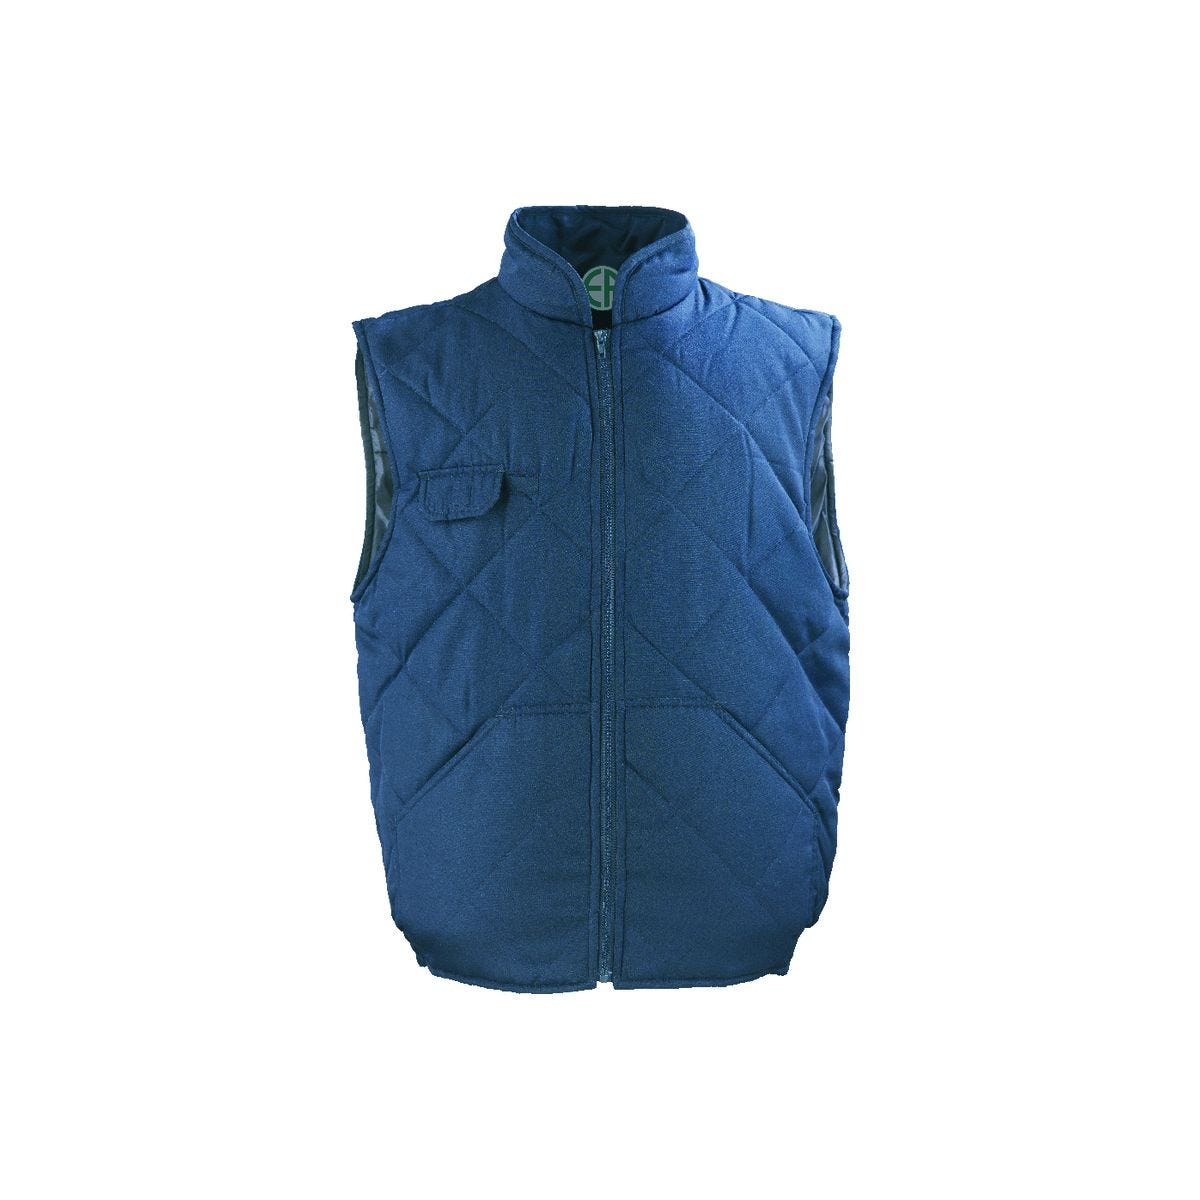 CHOUKA Gilet Froid marine, 65%PES/35%CO + Matelassage 180g/m² - COVERGUARD - Taille M 0